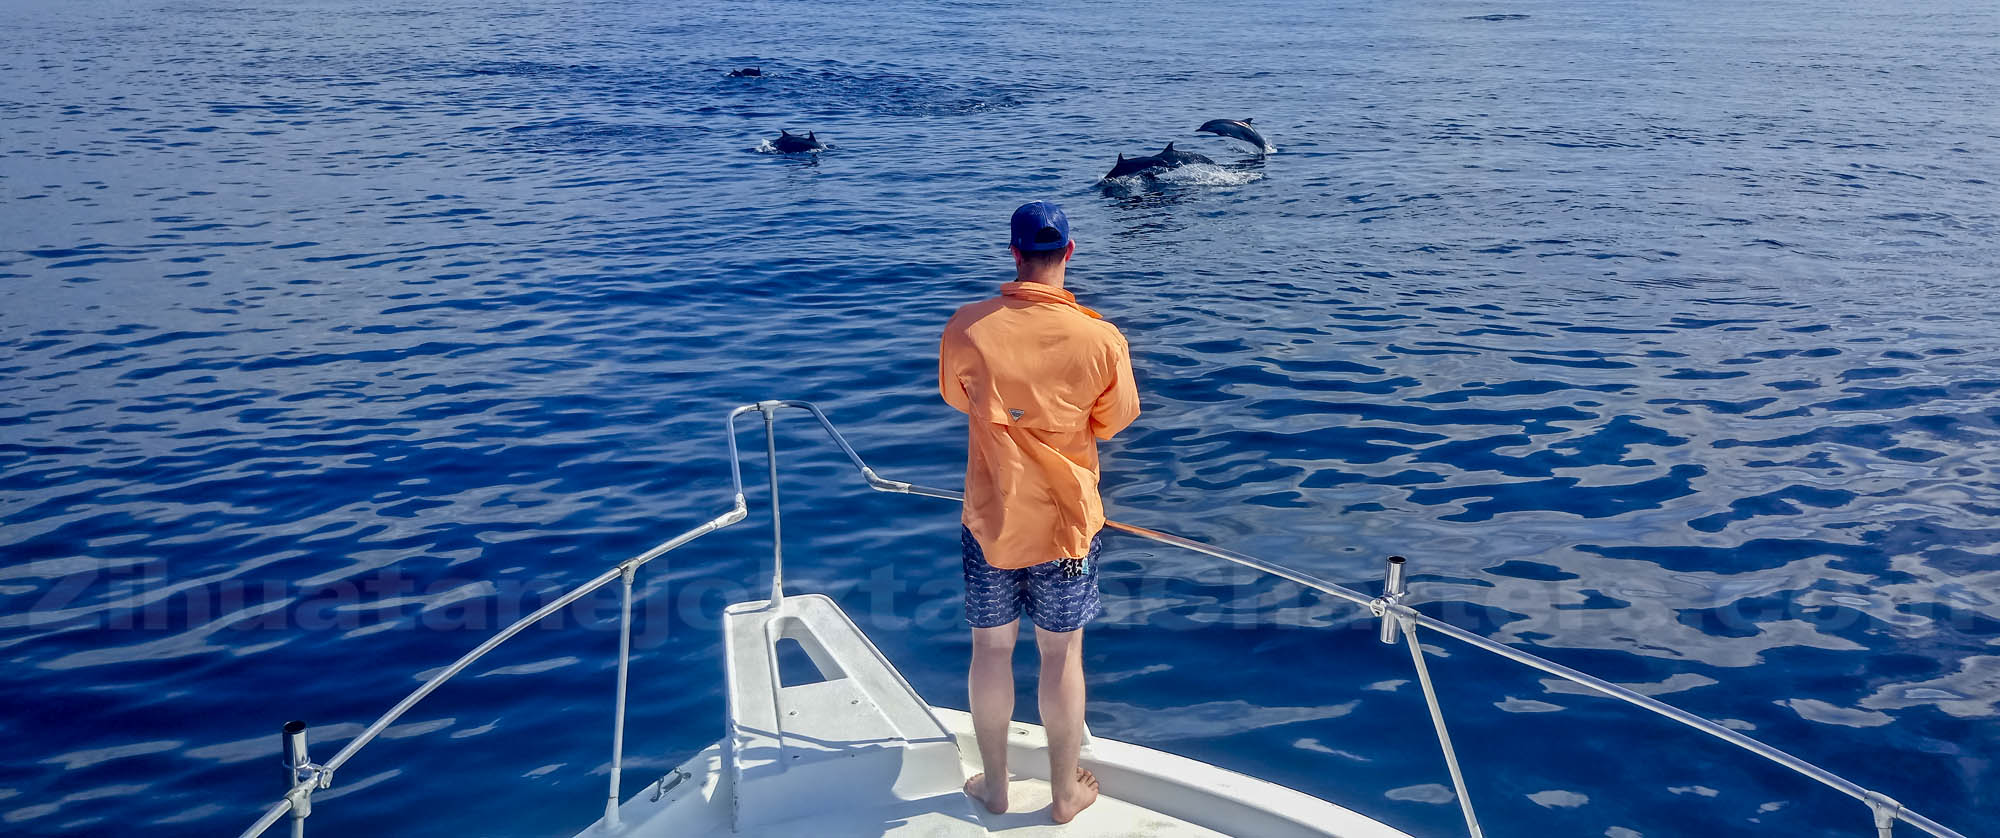 Watching dolphins